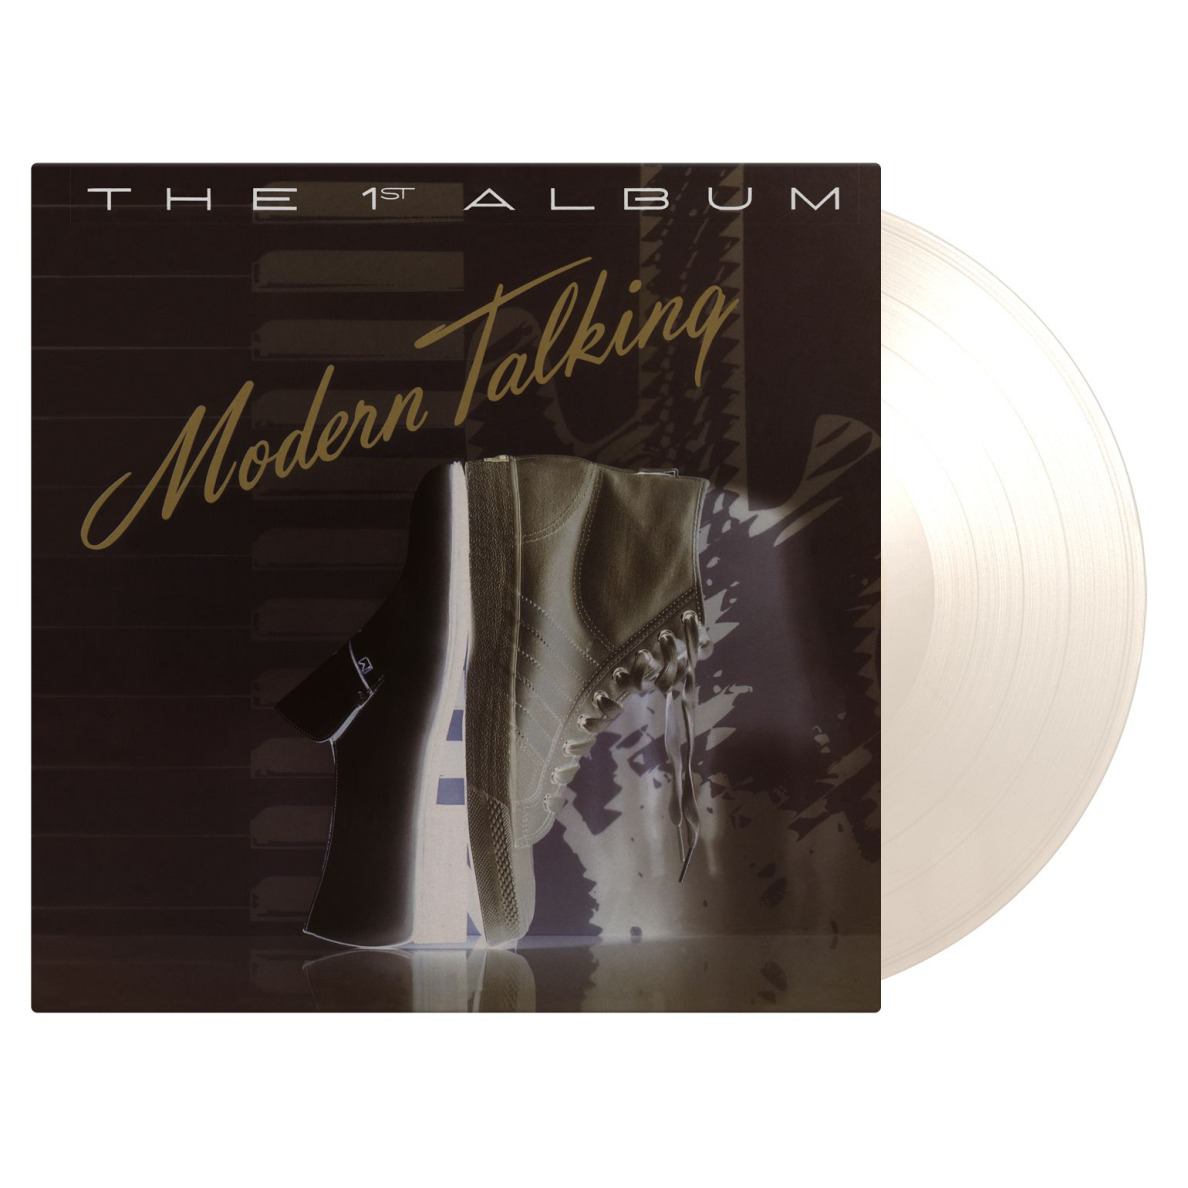 Modern Talking - The 1st Album: Limited Edition Silver Marbled Vinyl LP